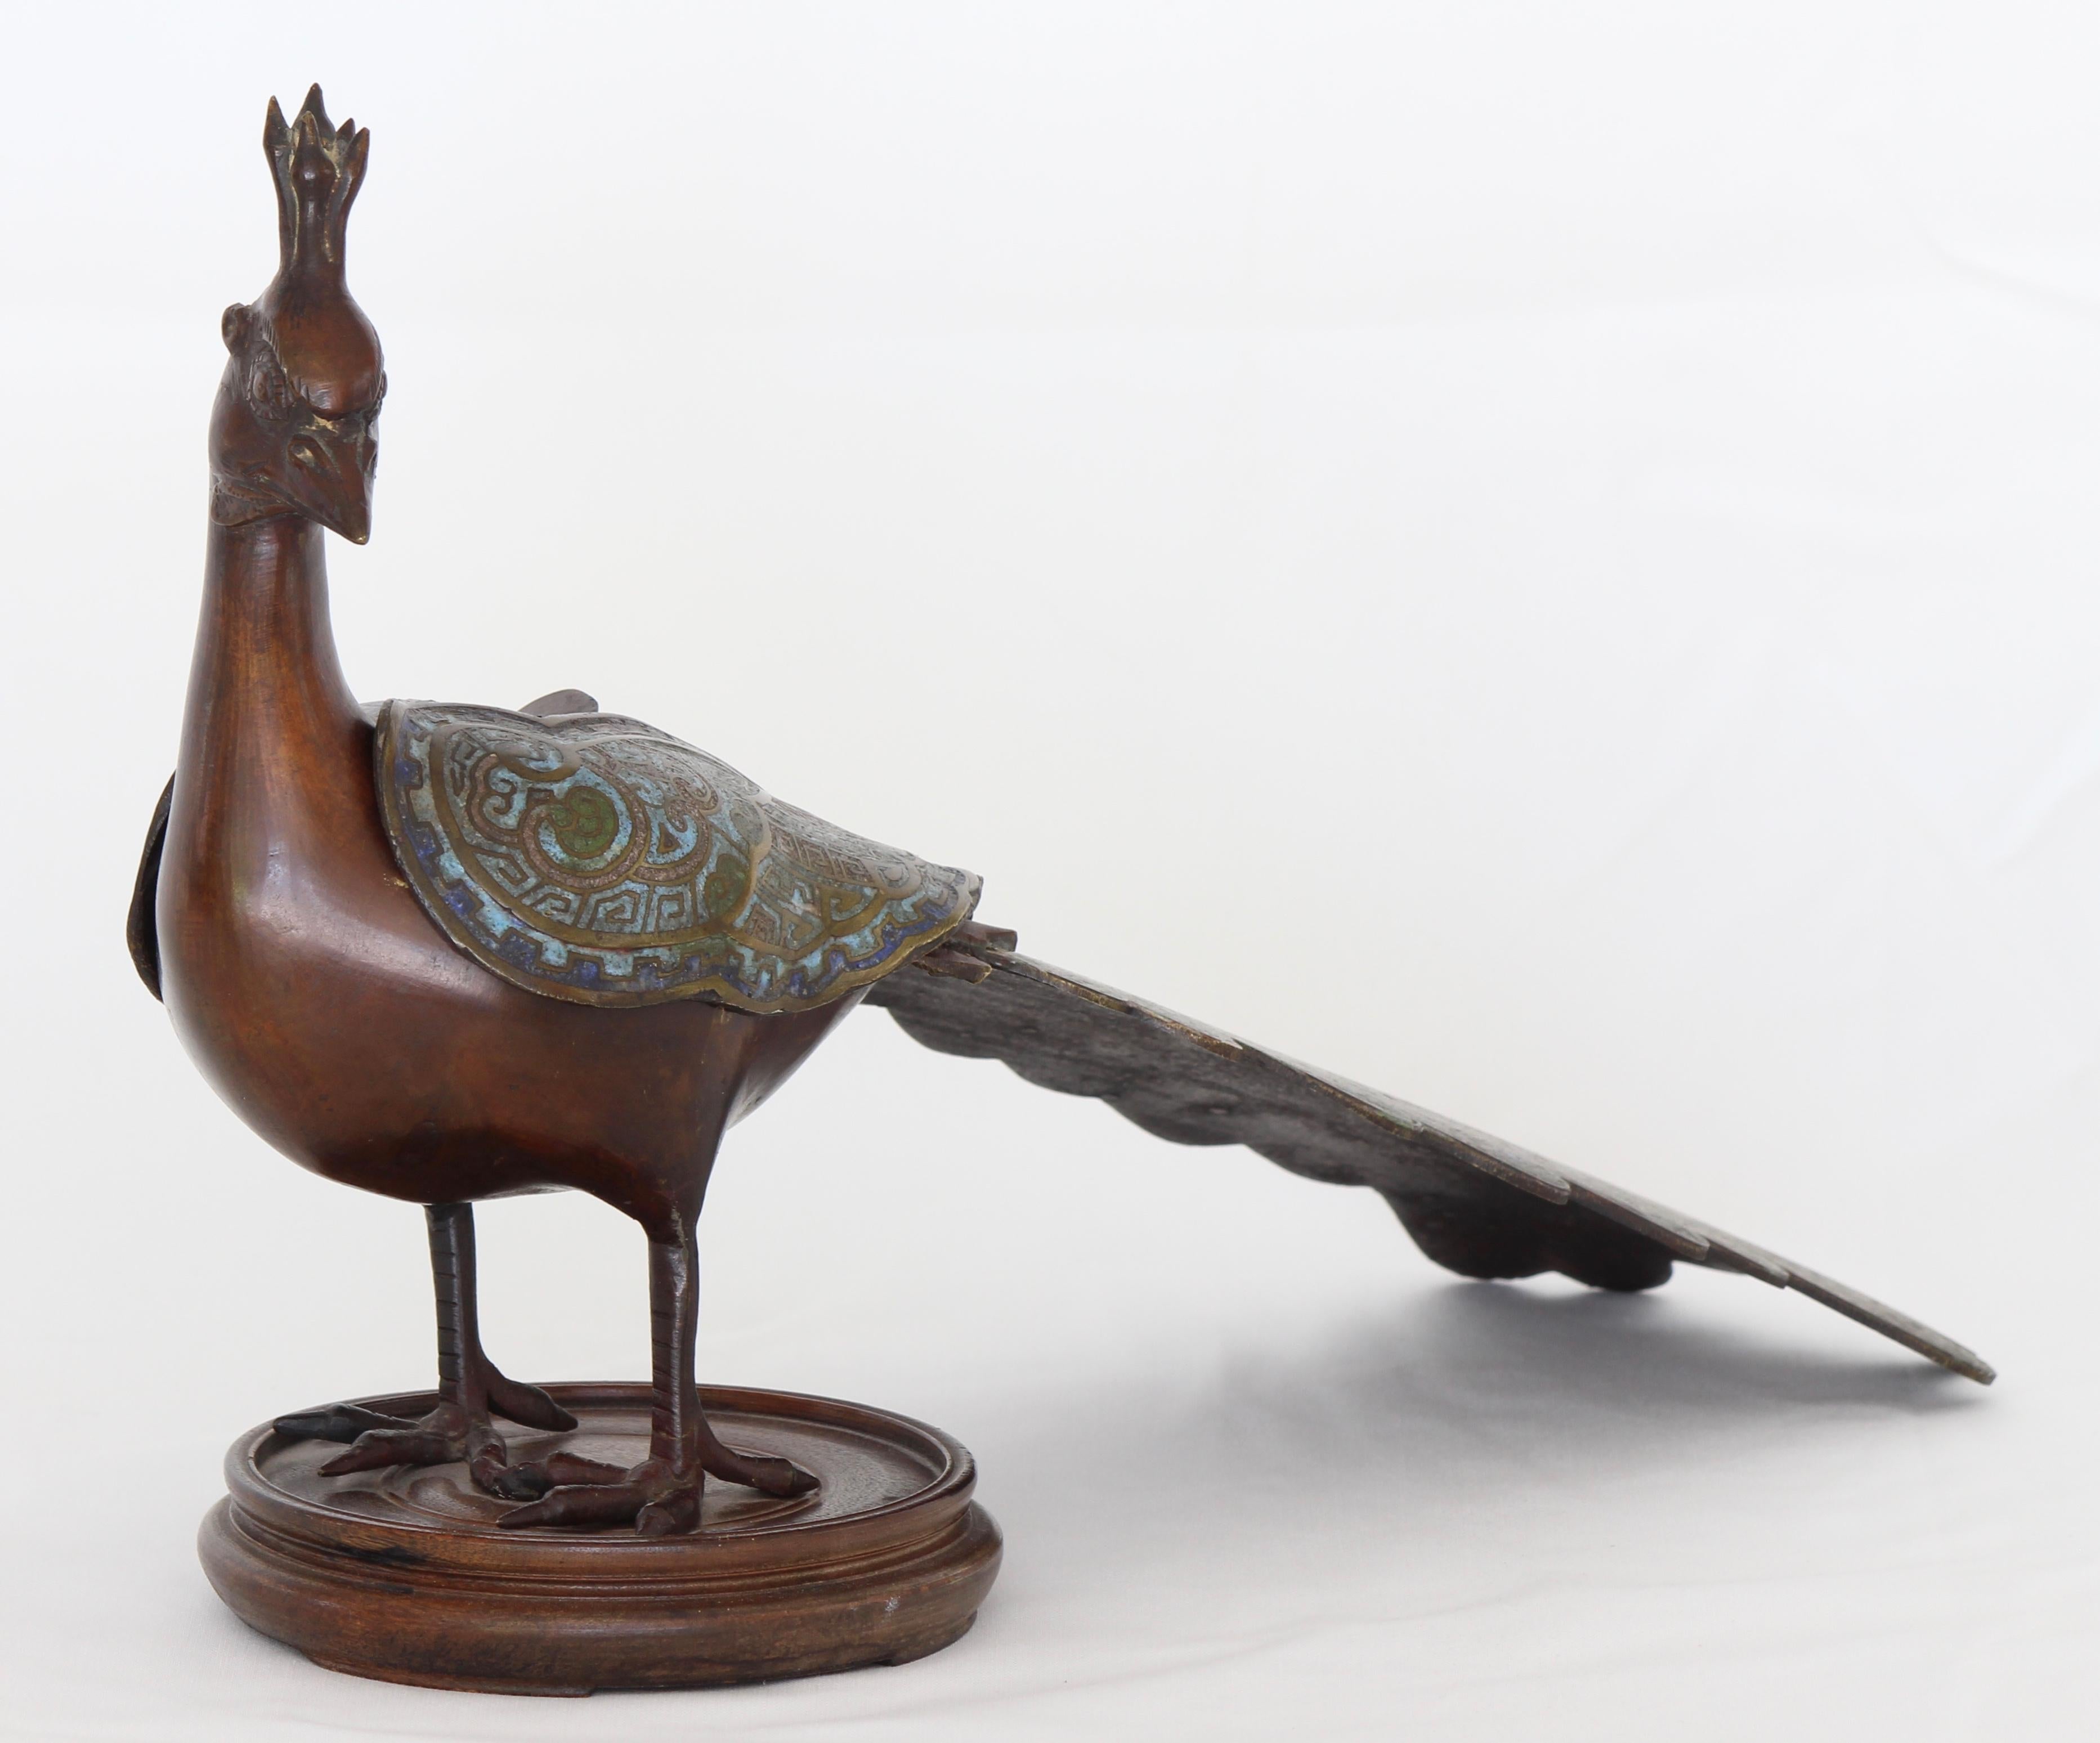 A large and elegant early 20th century enamel and bronze peacock form incense burner or censer. The bird is mounted on a later weighted wood base.